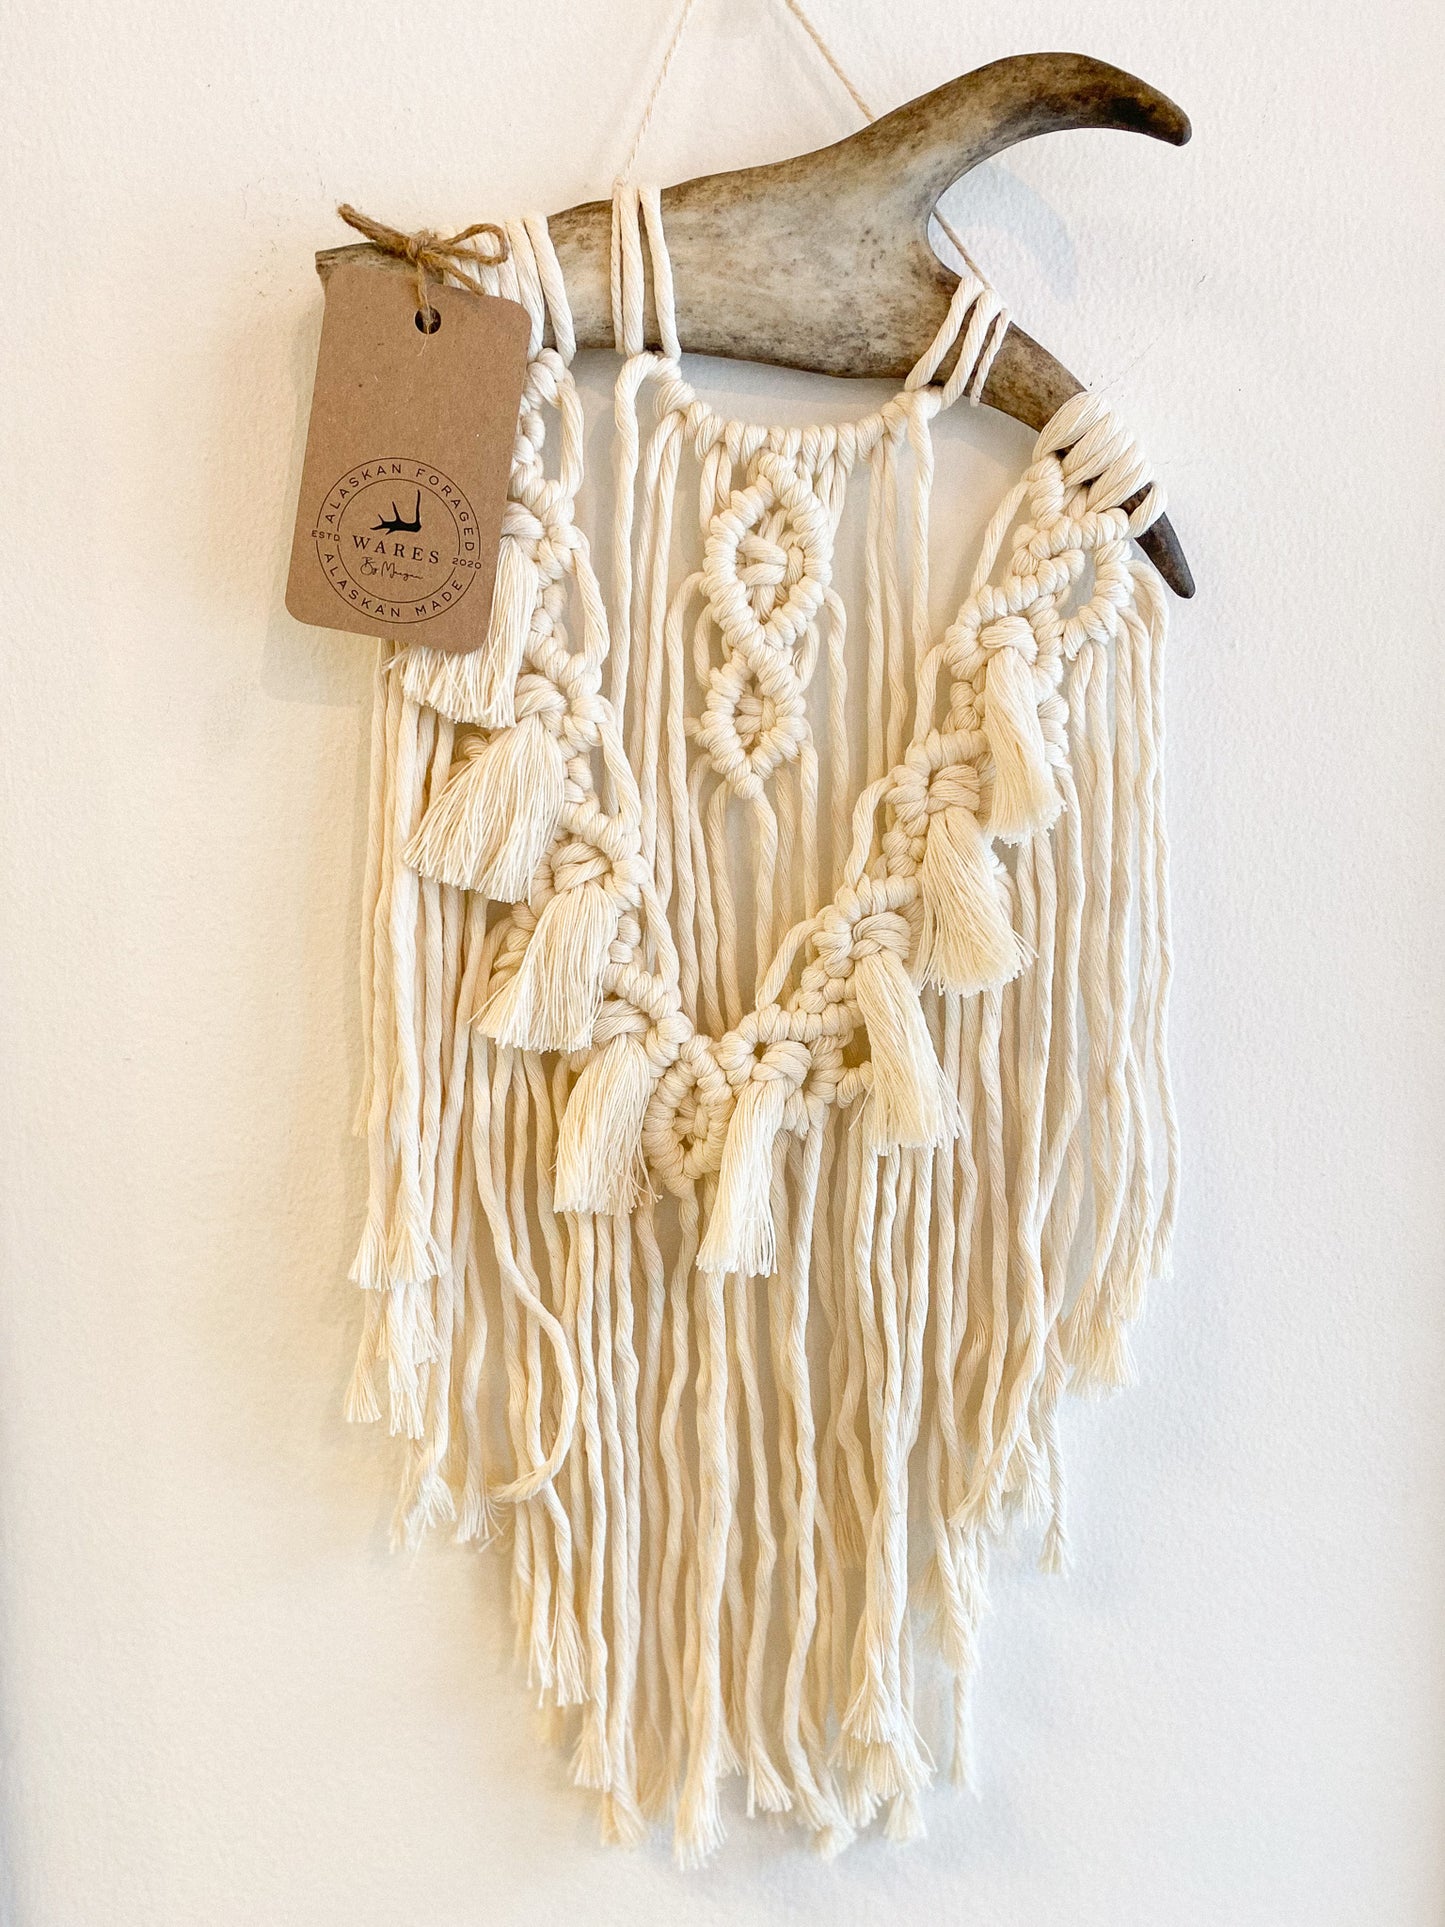 White Macrame with Caribou Antler by Wares by Maegan